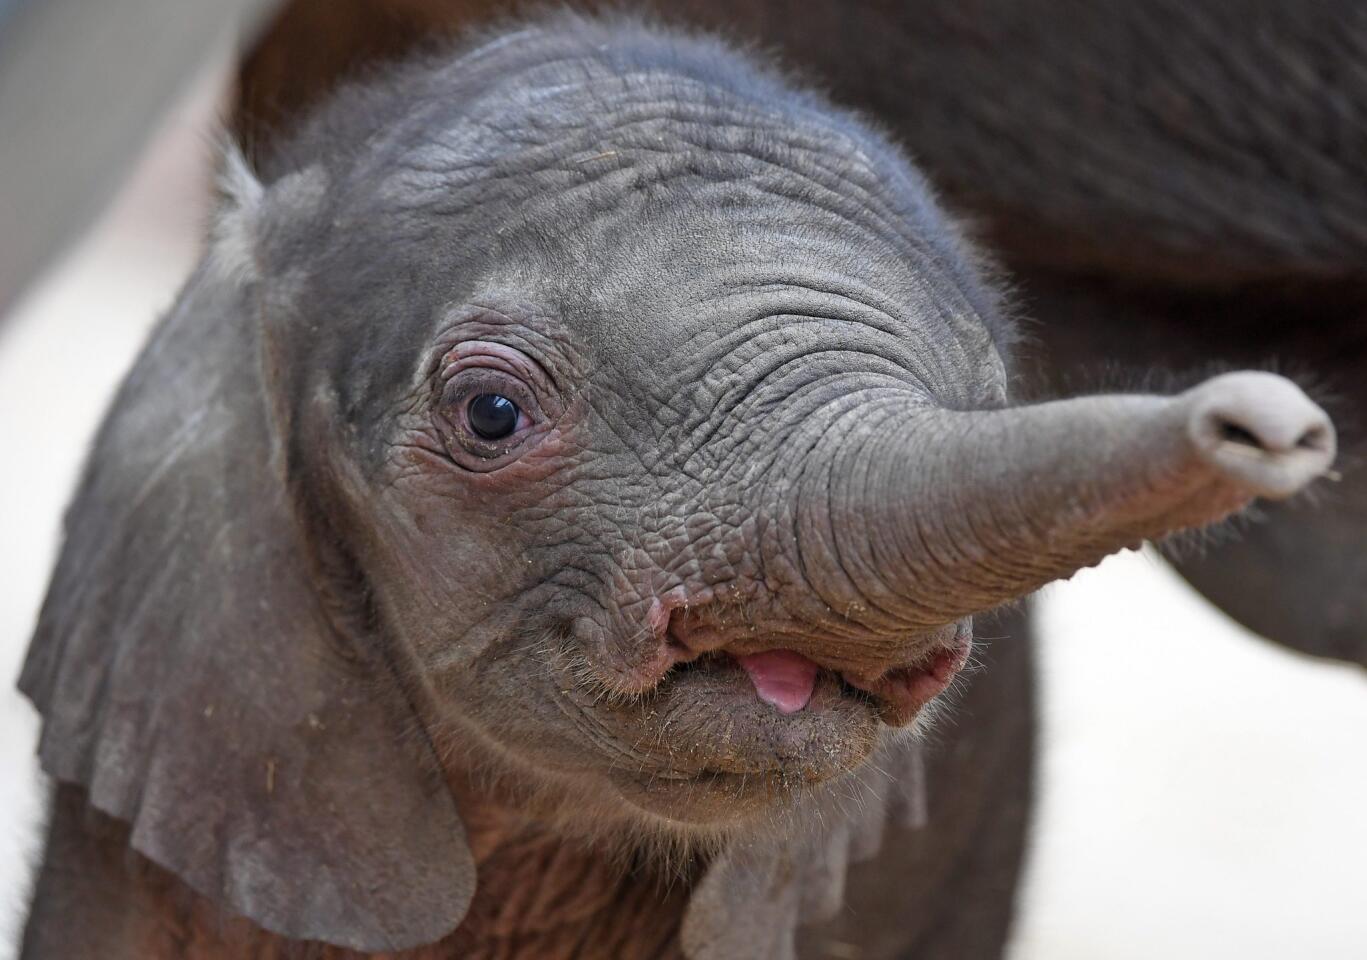 A newborn elephant calf explores its enclosure at the zoo in Halle/Saale, Germany, on June 30, 2016. The calf was born June 26, and elephant Panya is expected to give birth to another calf in August.